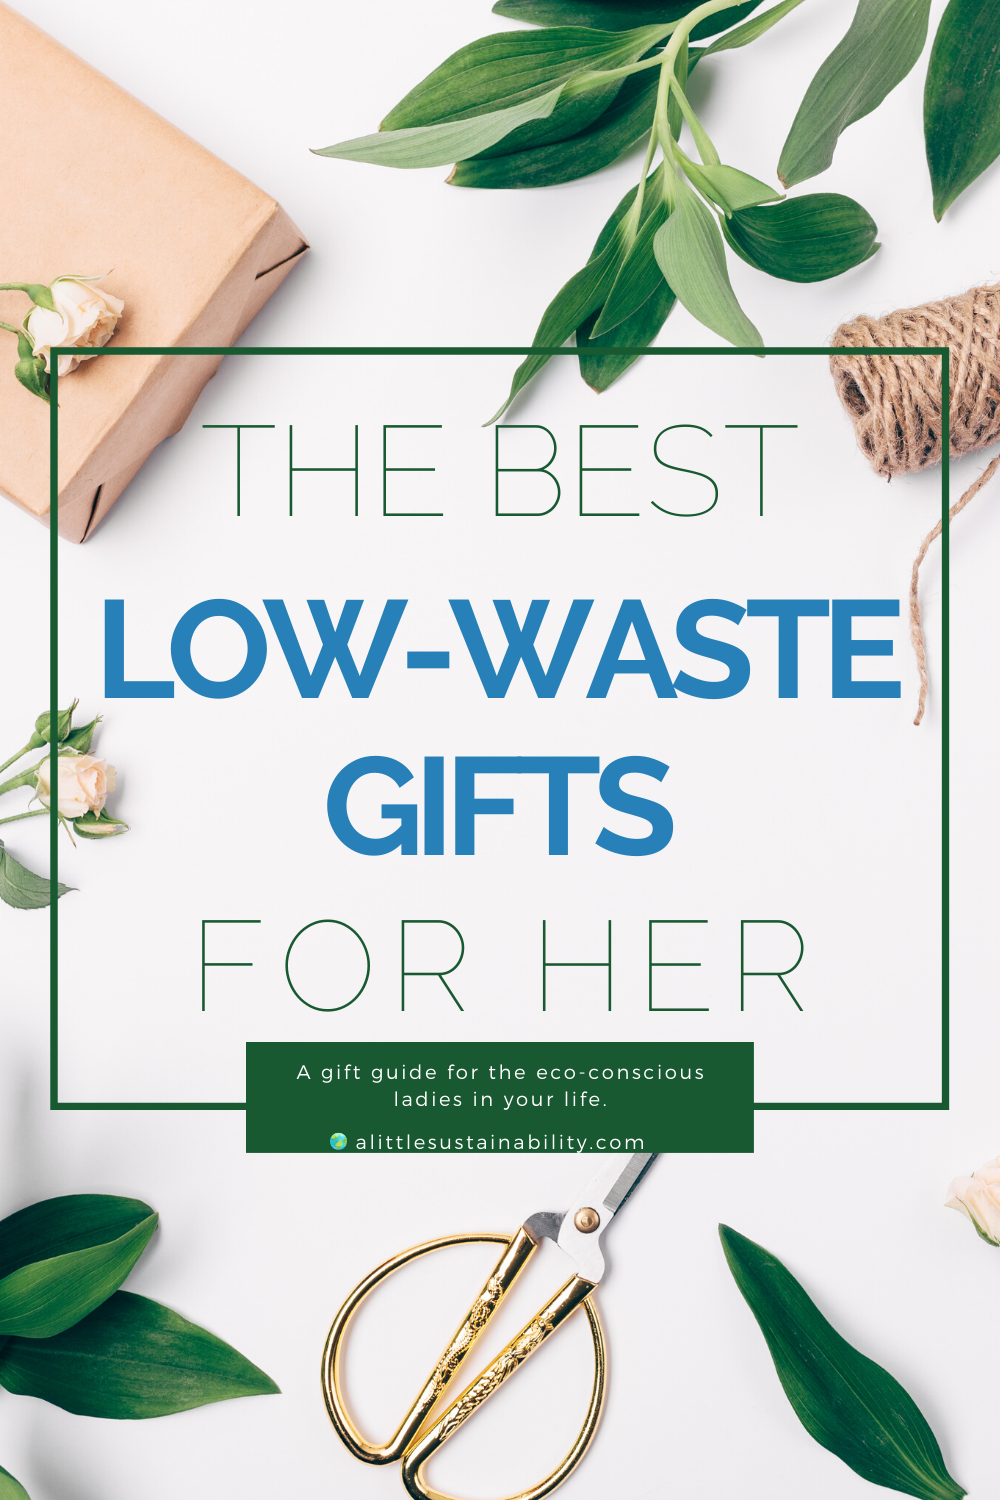 The Best Low-Waste gifts for her. A gift guide for the eco-conscious ladies in your life. 10 gifts for her birthday, anniversary, and more.